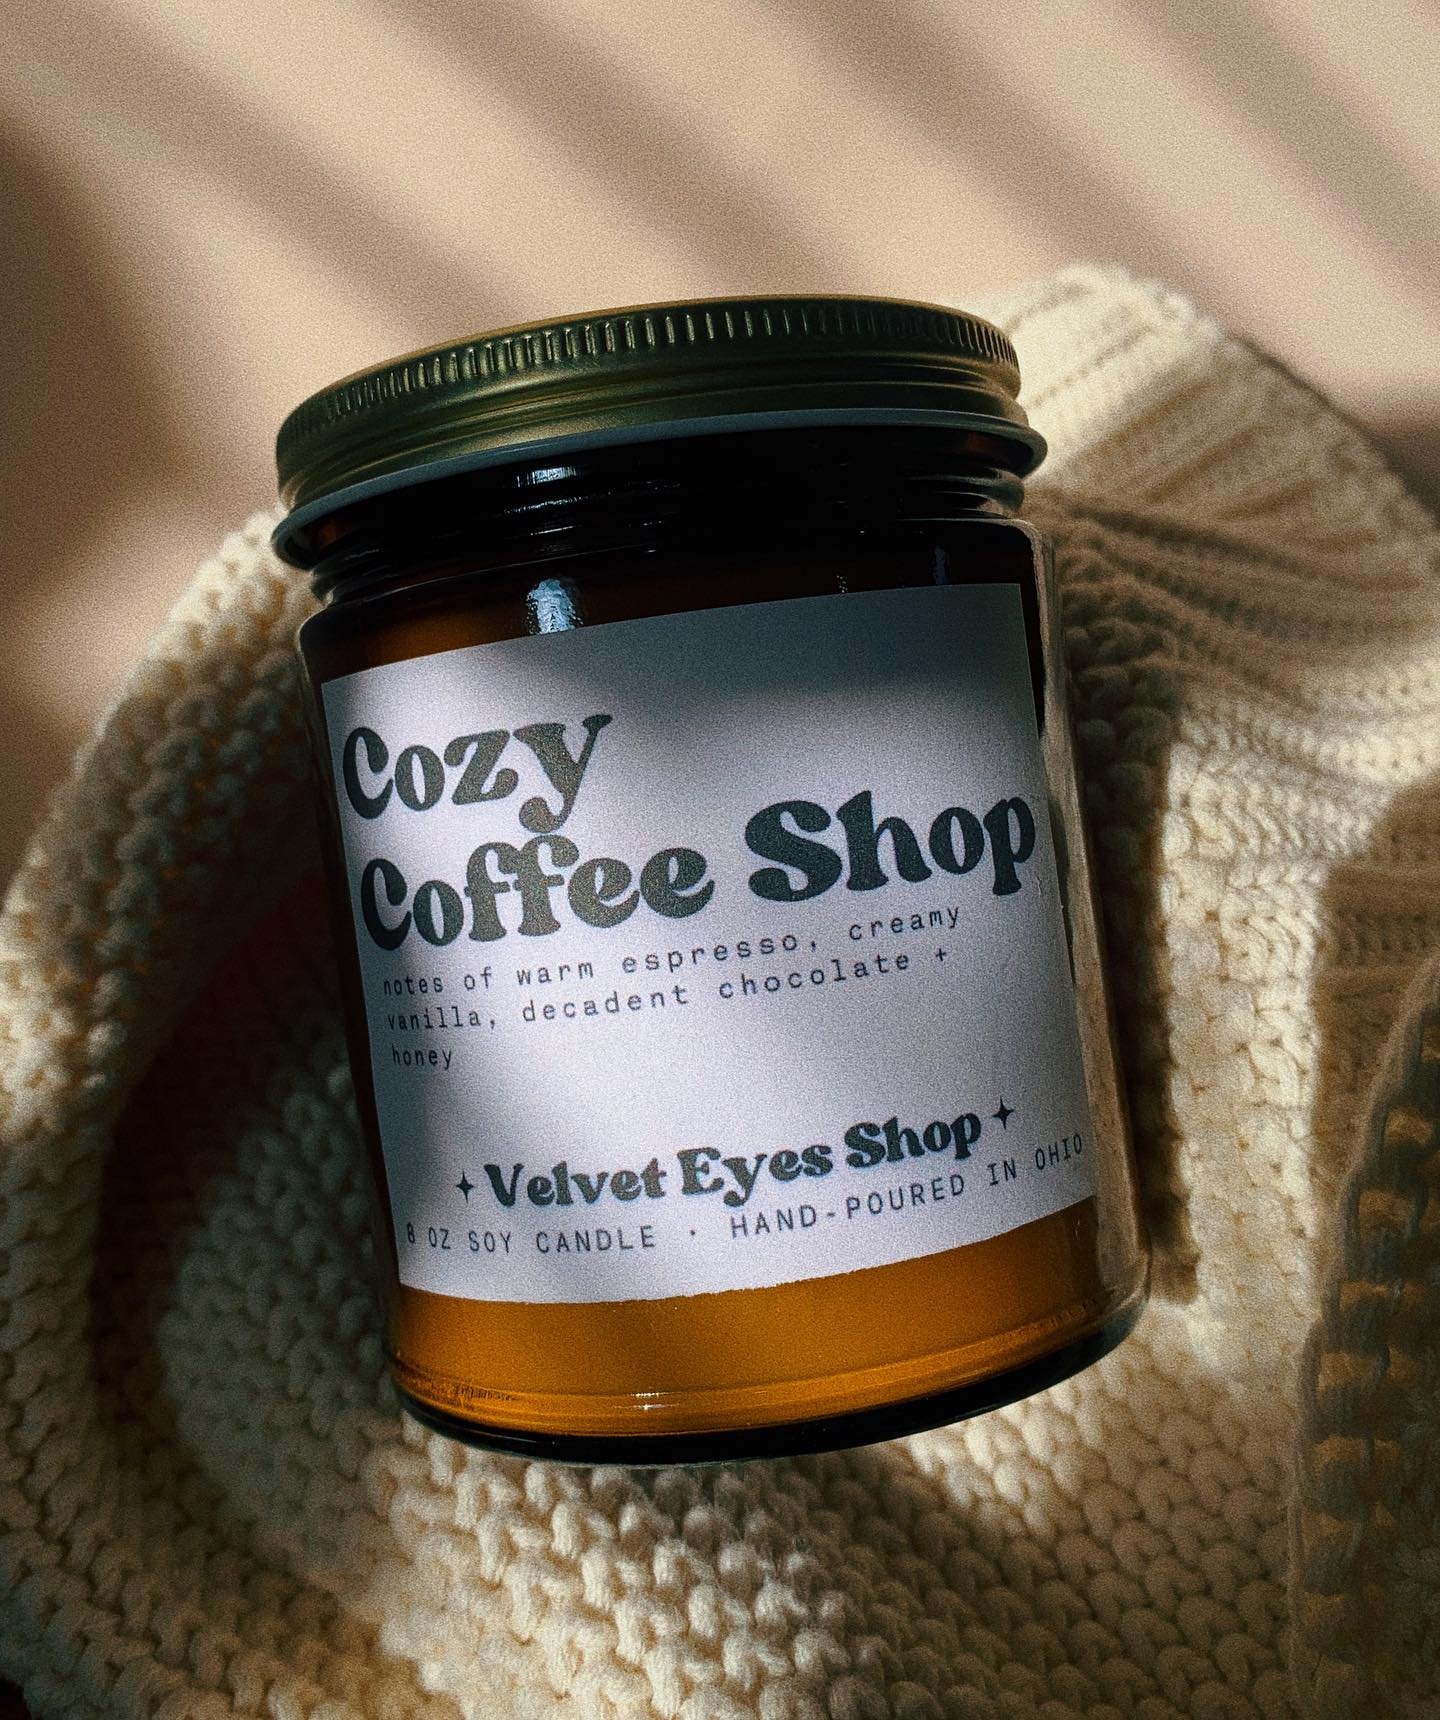 Cozy Coffee Shop &mdash;
fragrance notes: warm espresso, creamy vanilla, decadent chocolate &amp; honey
mood: this scent is perfect for when you&rsquo;re looking for a cozy, indulgent &amp; inviting scent to fill your home 

Here&rsquo;s a look into 